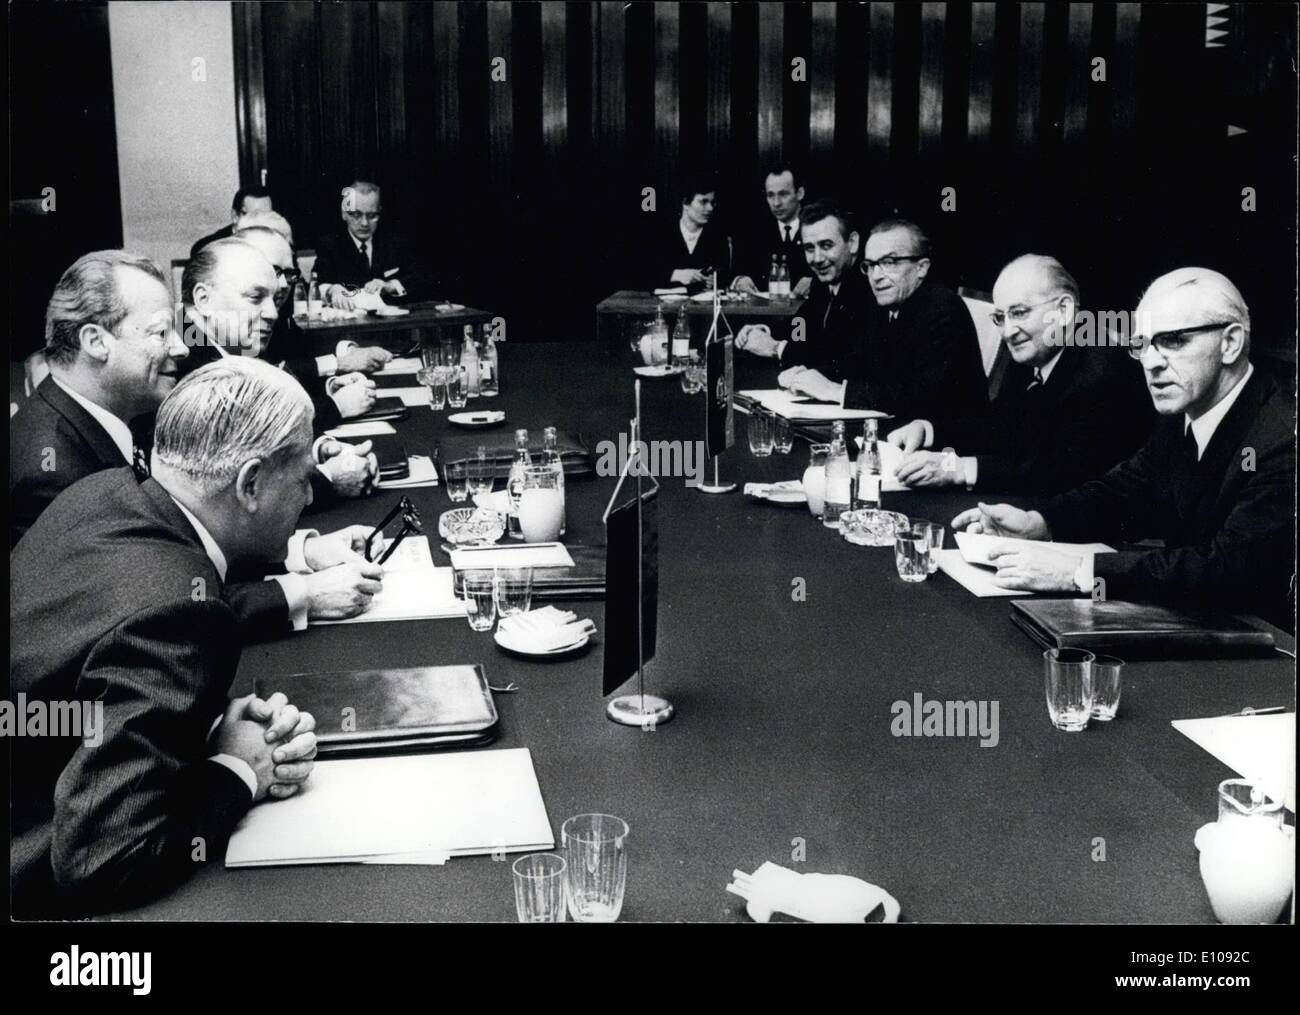 Mar. 03, 1970 - Meeting of Willy Brandt, the Chancellor of the Federal Republic of Germany and Willi Stoph, the Minister President of the German Democratic Republic in Erfurt on March 19th, 1970: Conference in Erfurt. From left to right sitting (right row): Minister President Willi Stoph Minister for Foreign Affairs of the GDR, Otto Winzer, Gunther Kohrt, State Secretary in the Ministry for Foreign Affairs of the GDR, Dr Stock Photo